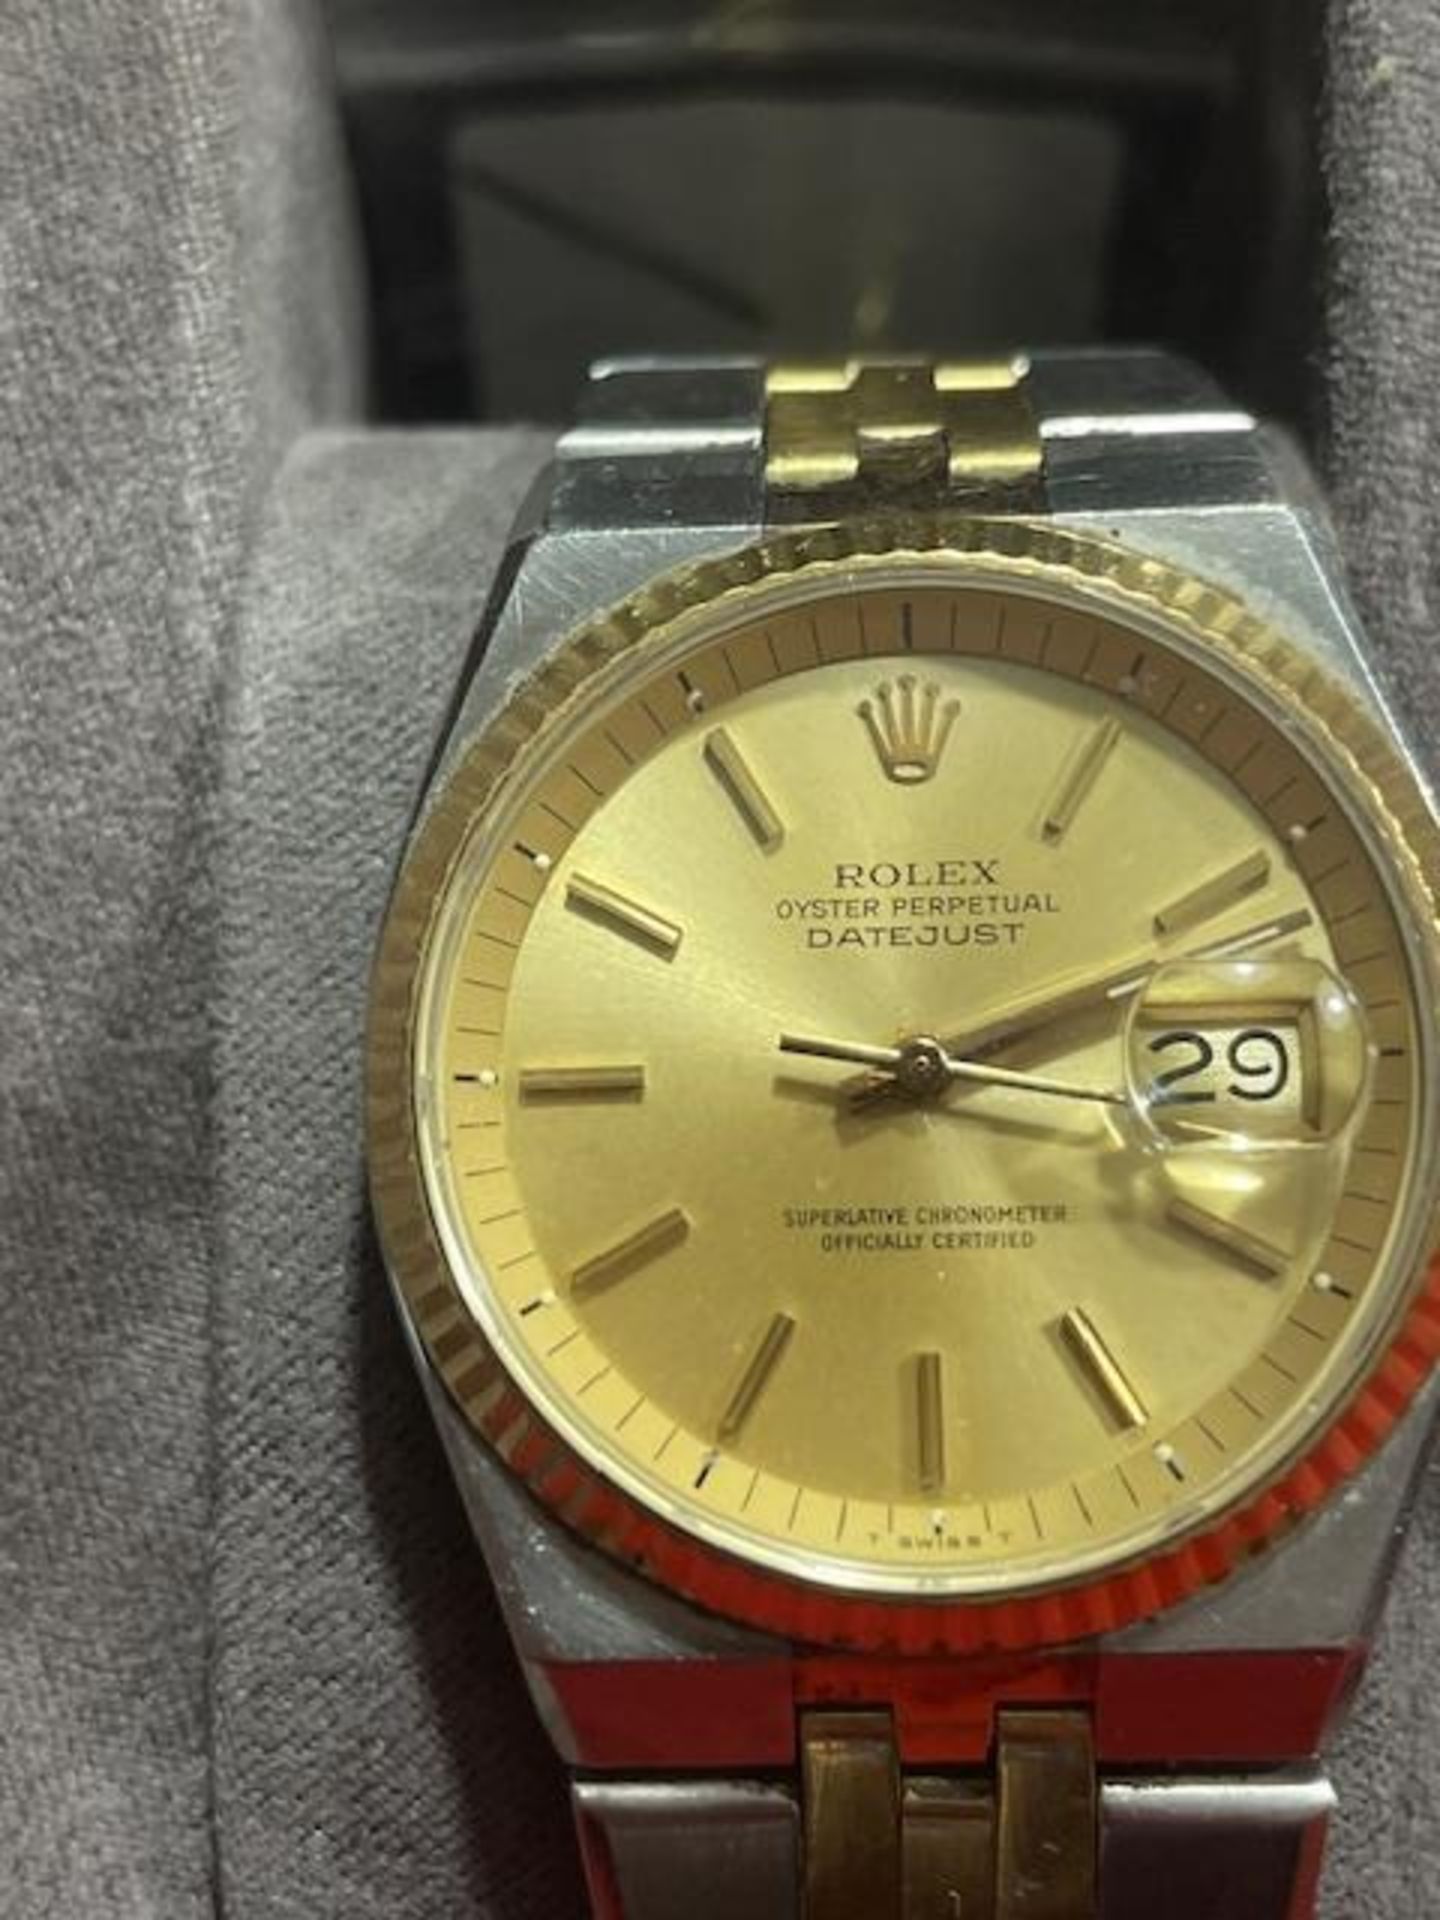 Rolex Oyster Purpetual DATEJUST Mens Watch - Image 11 of 20